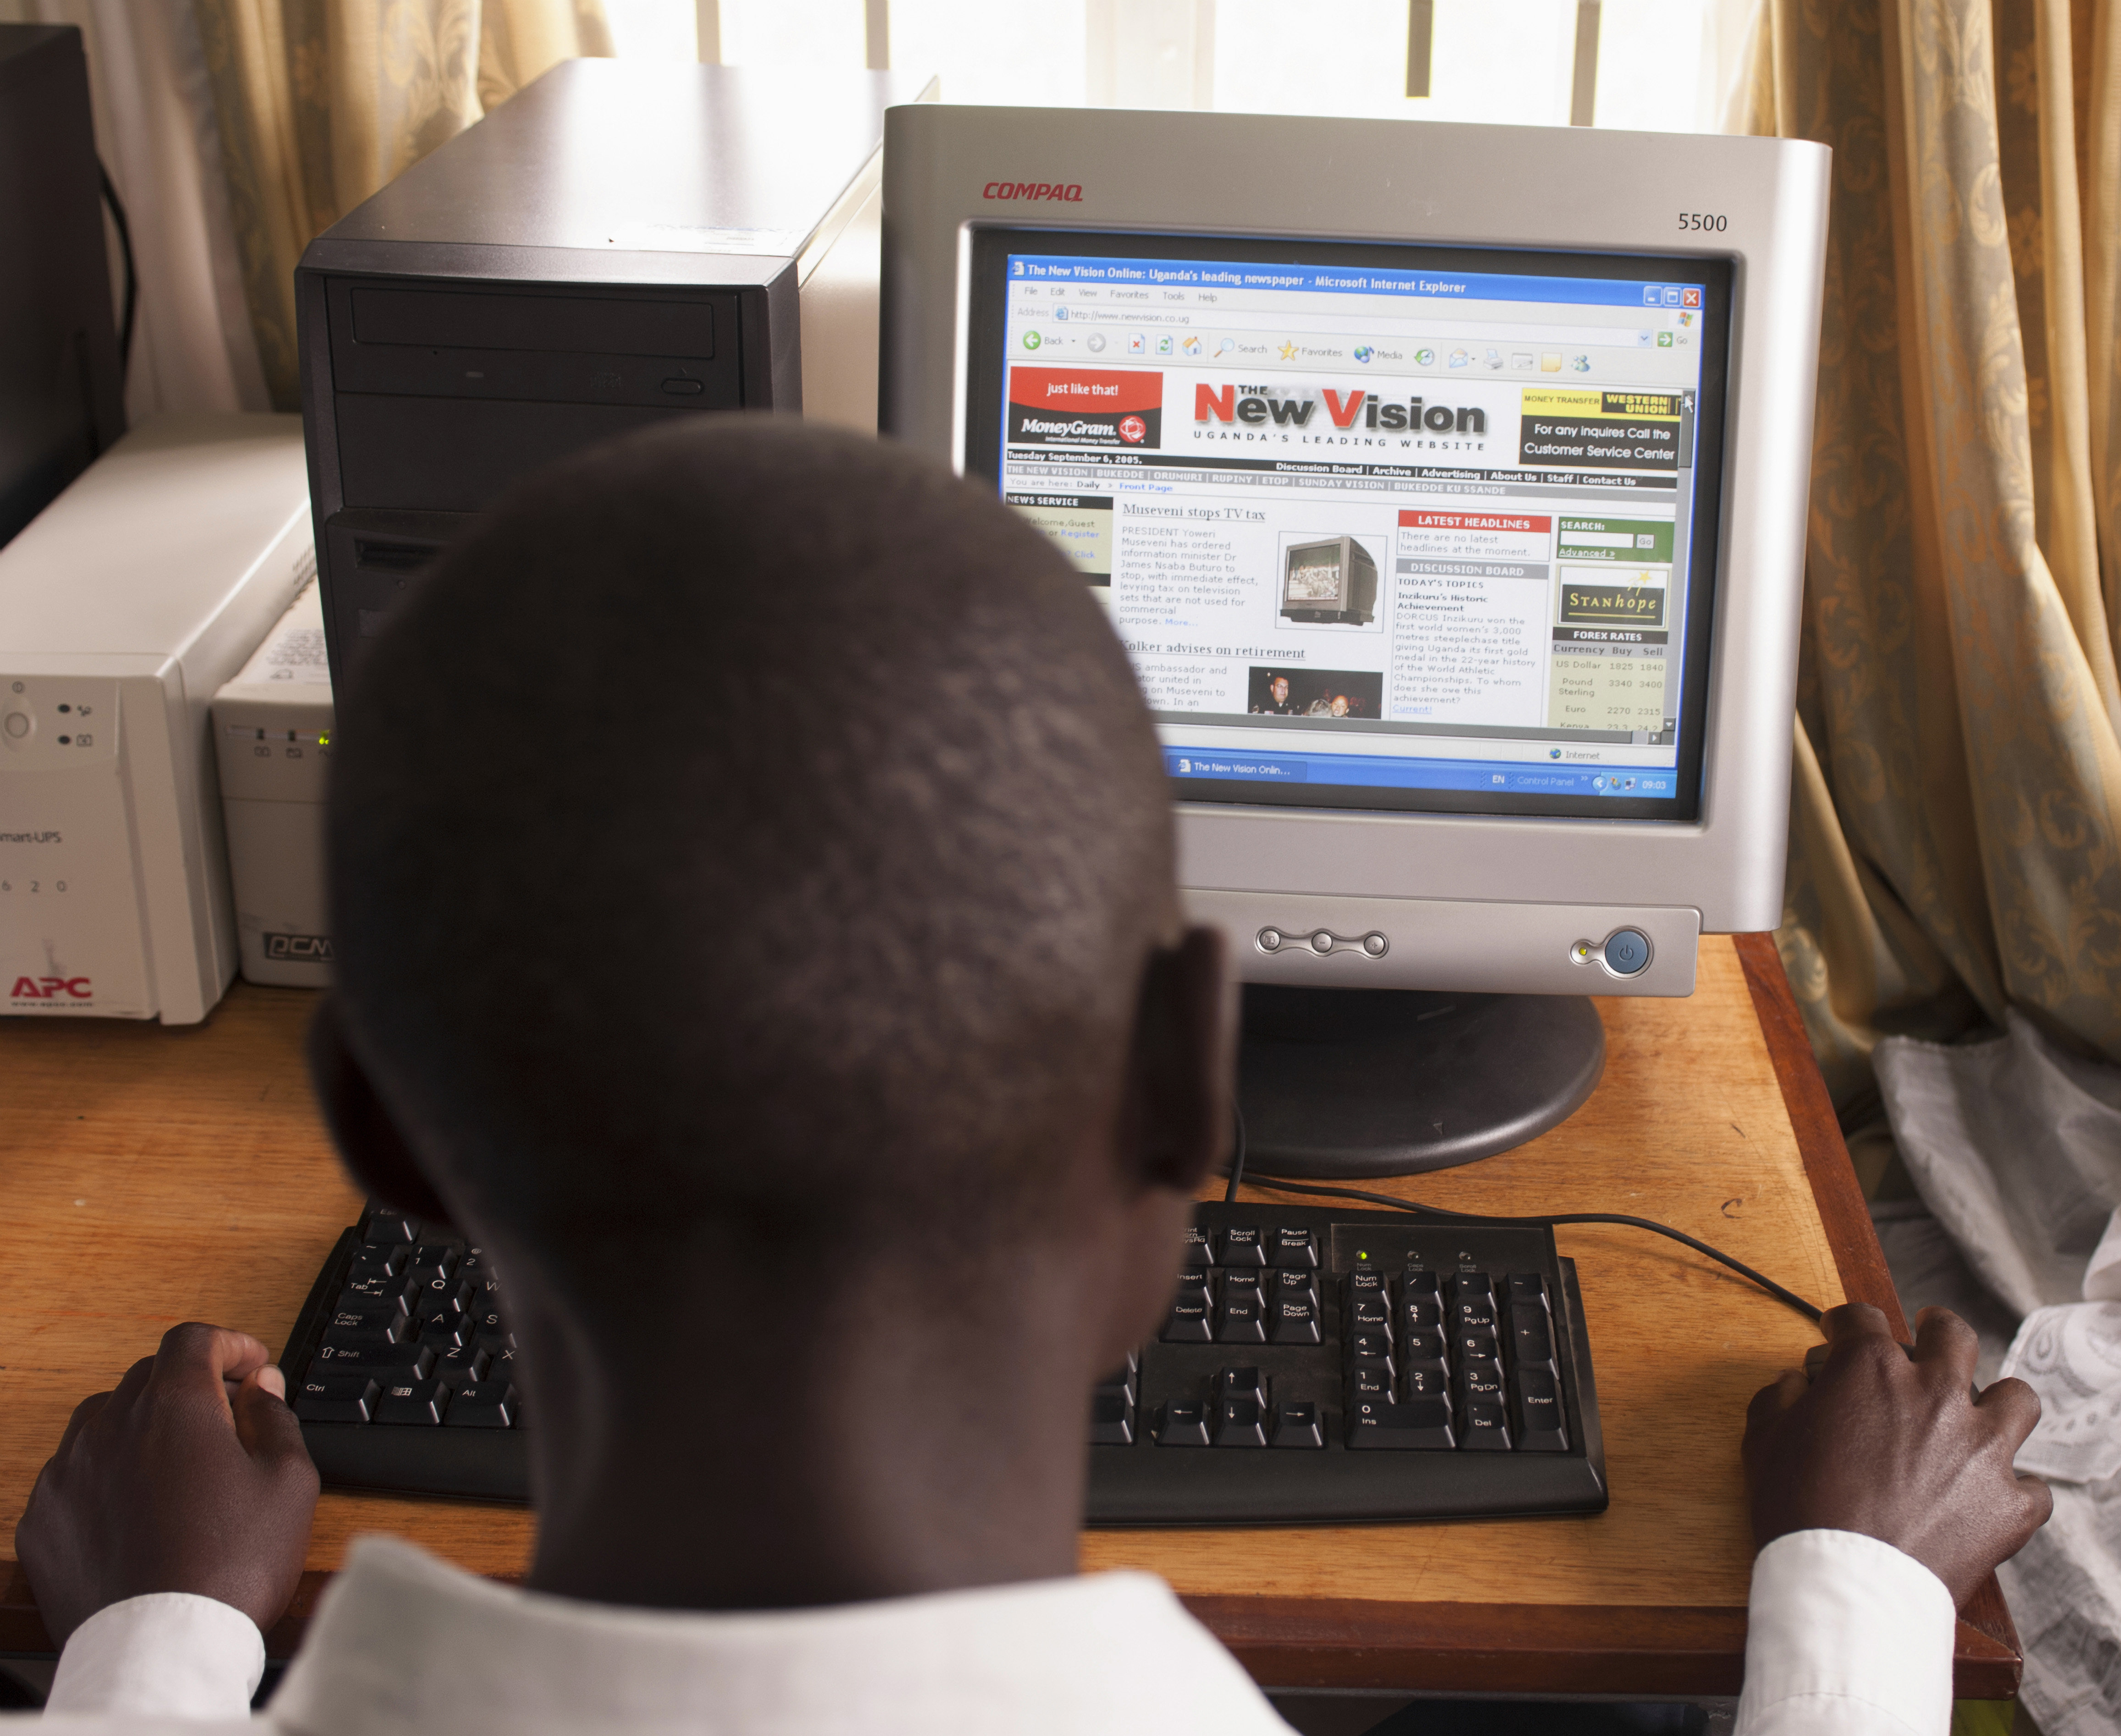 Uganda Buys A Pornography Detection Machine To Catch Offenders, Official Says HuffPost The WorldPost